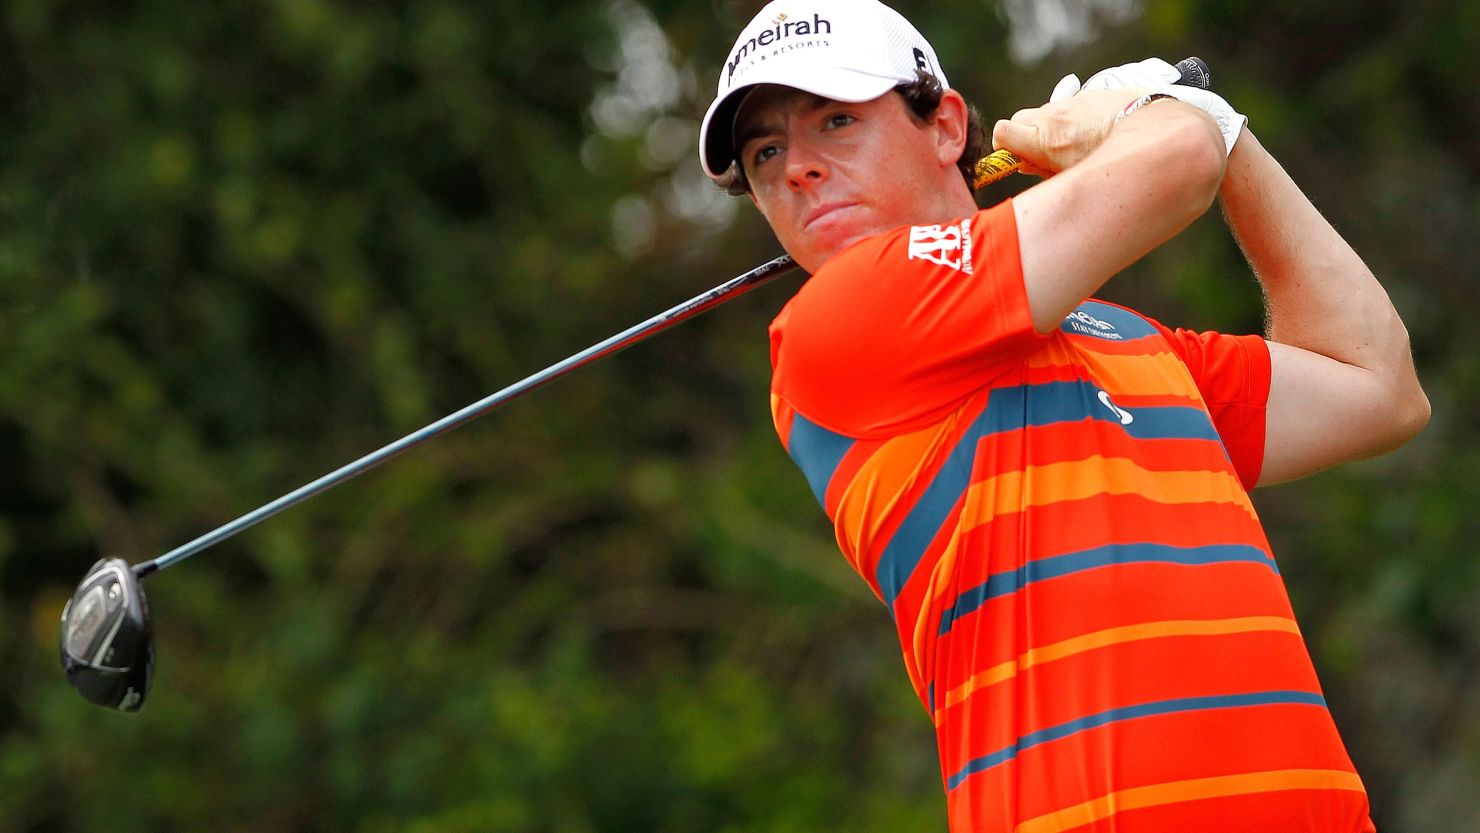 Northern Ireland's Rory McIlroy tops the leaderboard in Florida heading into Sunday's finale